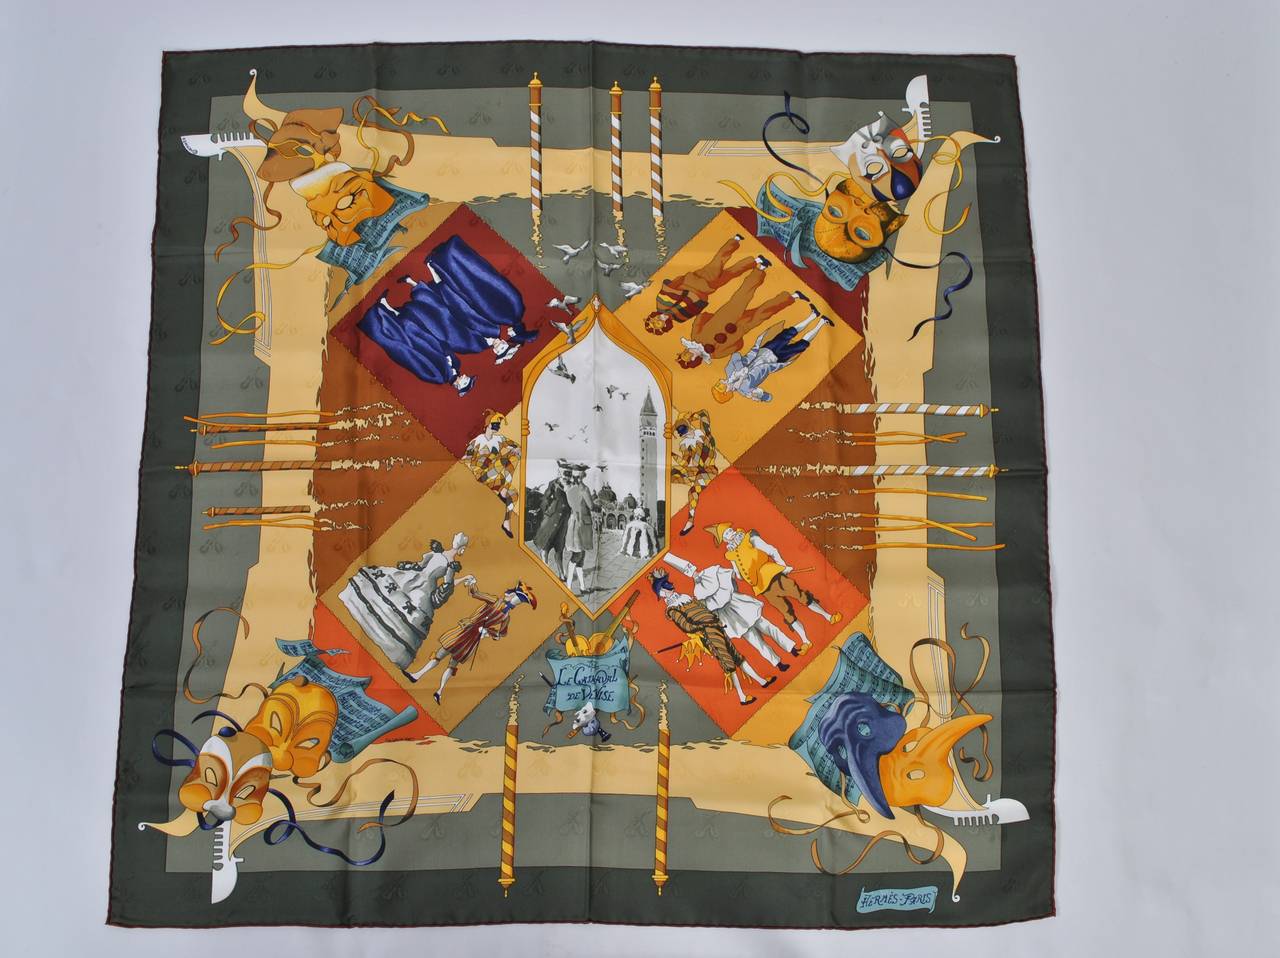 A beautiful example of why Hermes scarves are valued for their beauty and design, this one is rendered in shades of dark green against warmer tones. The composition is an interplay of geometry and figural delights from the Commedia dell'Arte,